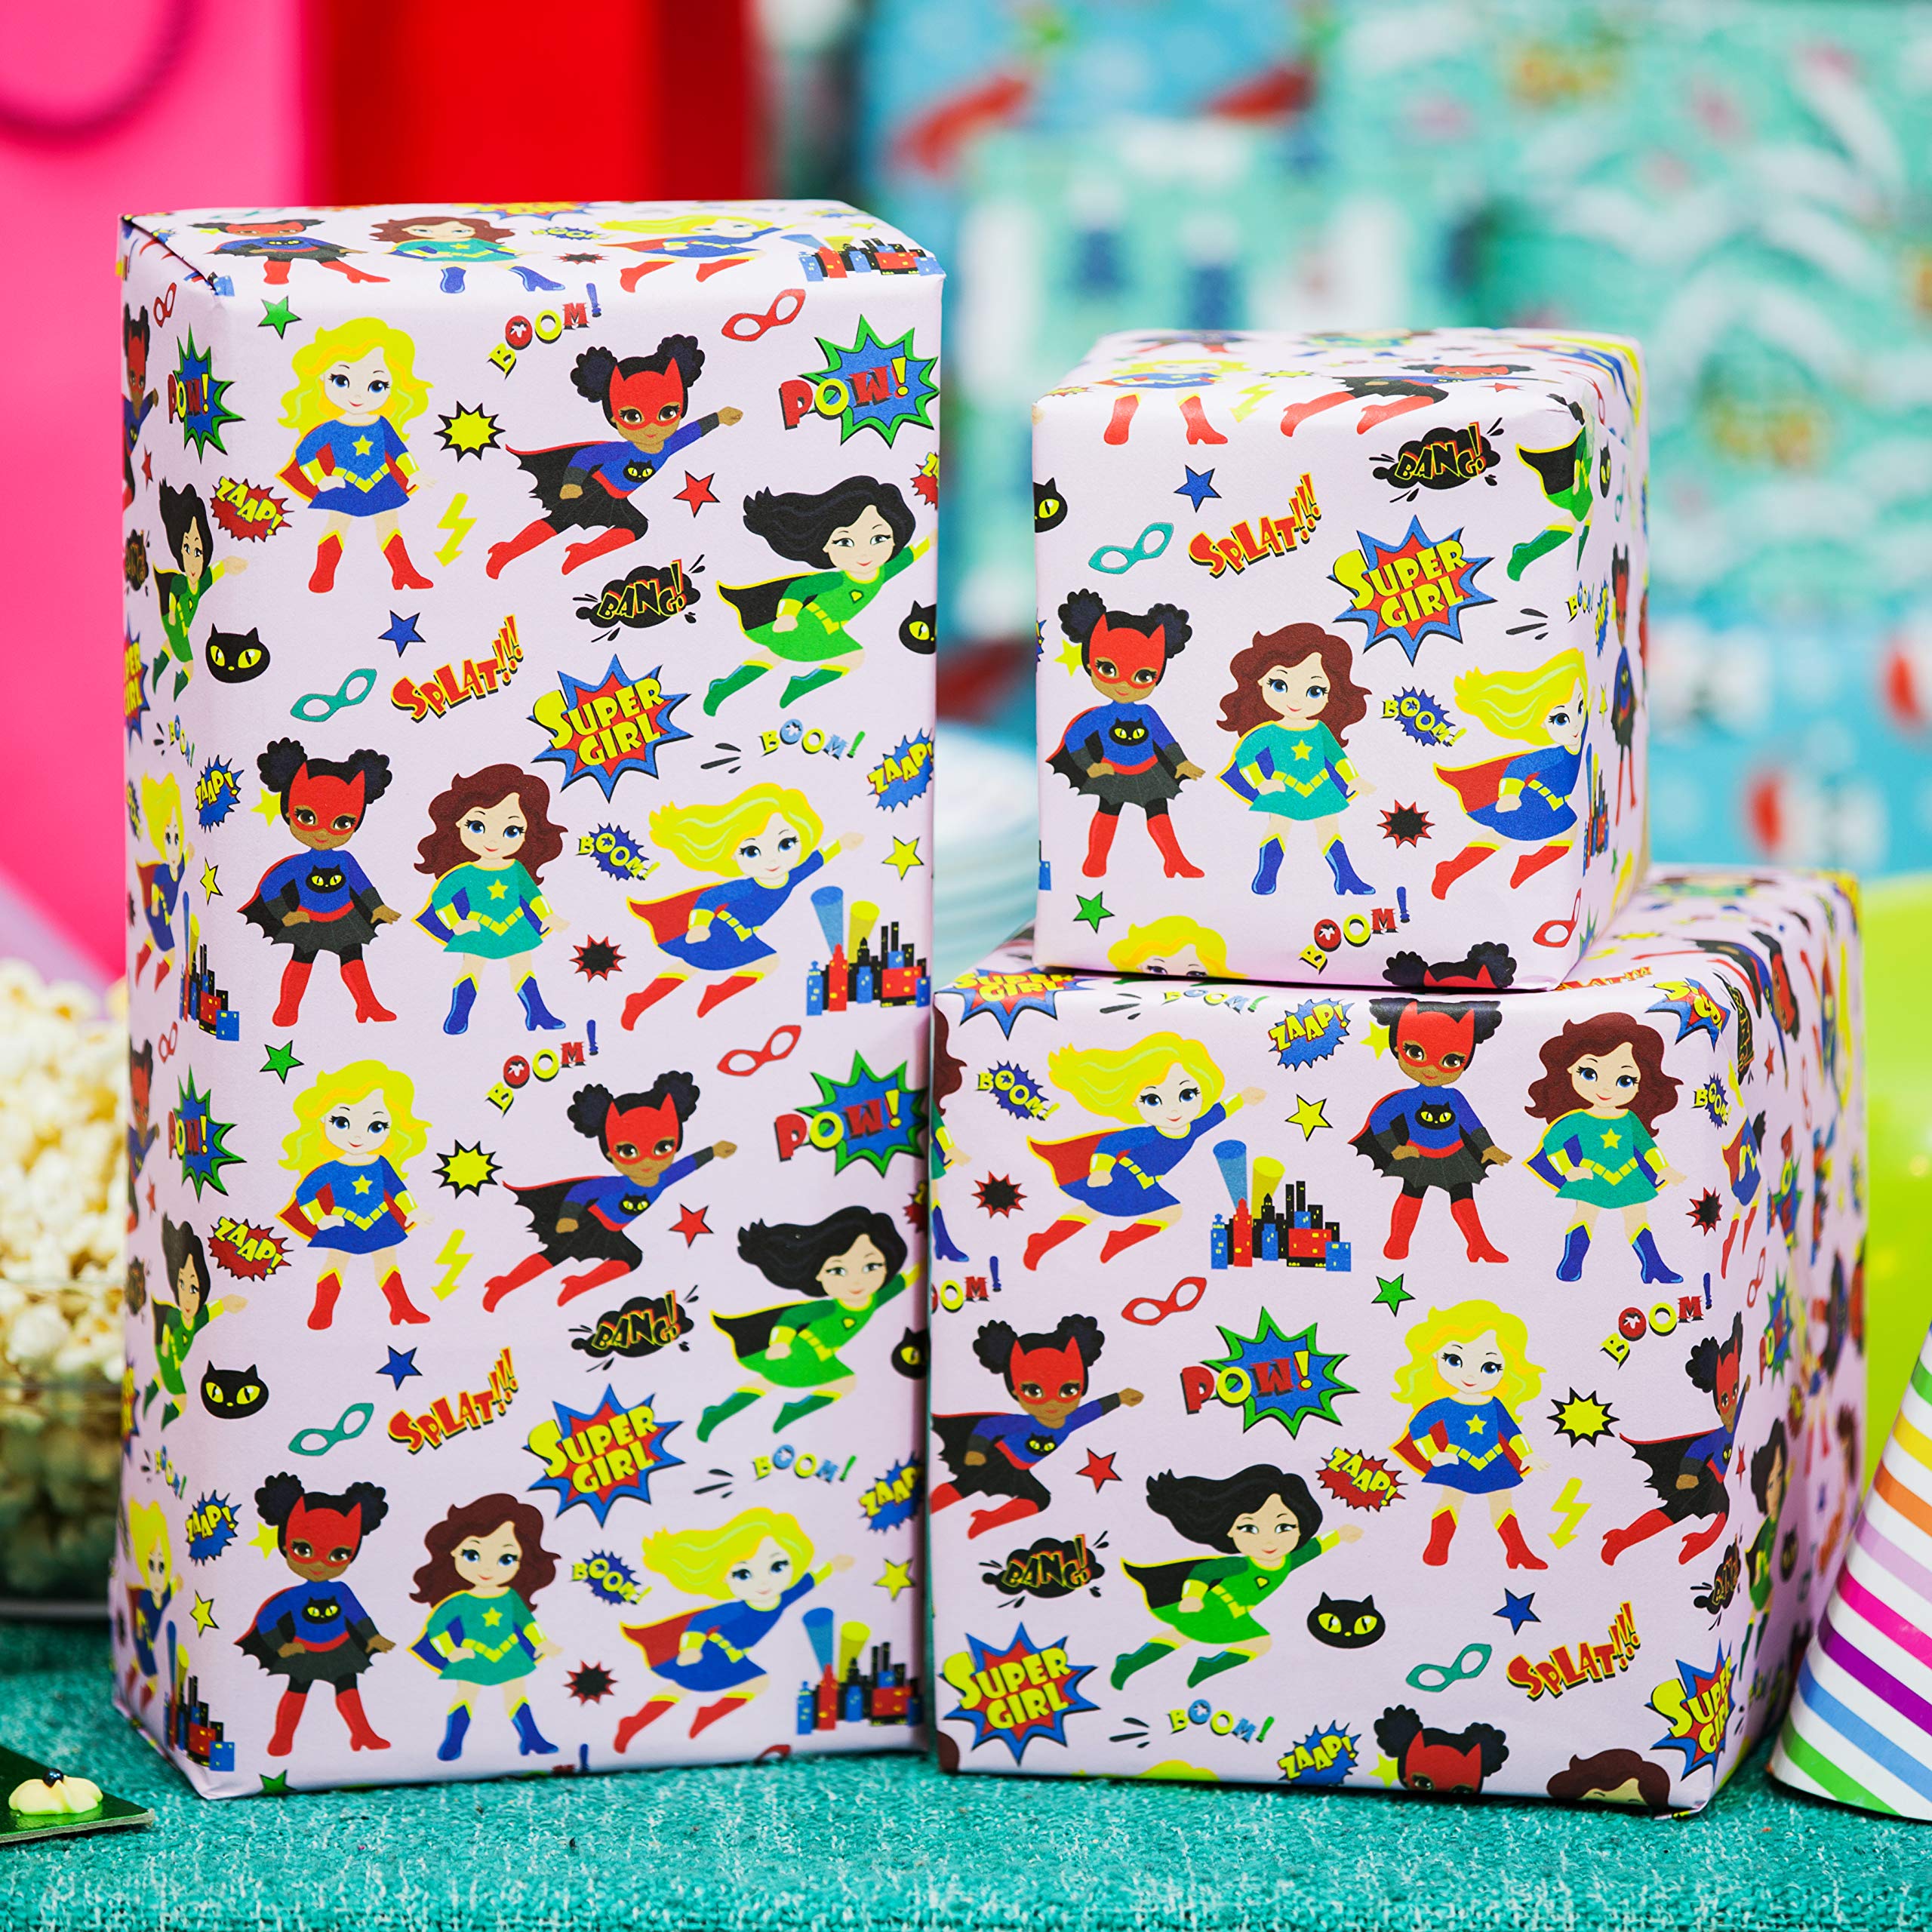 4 x Superhero Multicultural Wrapping Paper for Kids, Girls & Women- Premium 100% Recycled and Recyclable Gift Wrap Sheets 70x50cm for Christmas, Birthday, Anniversary, Thank You & More